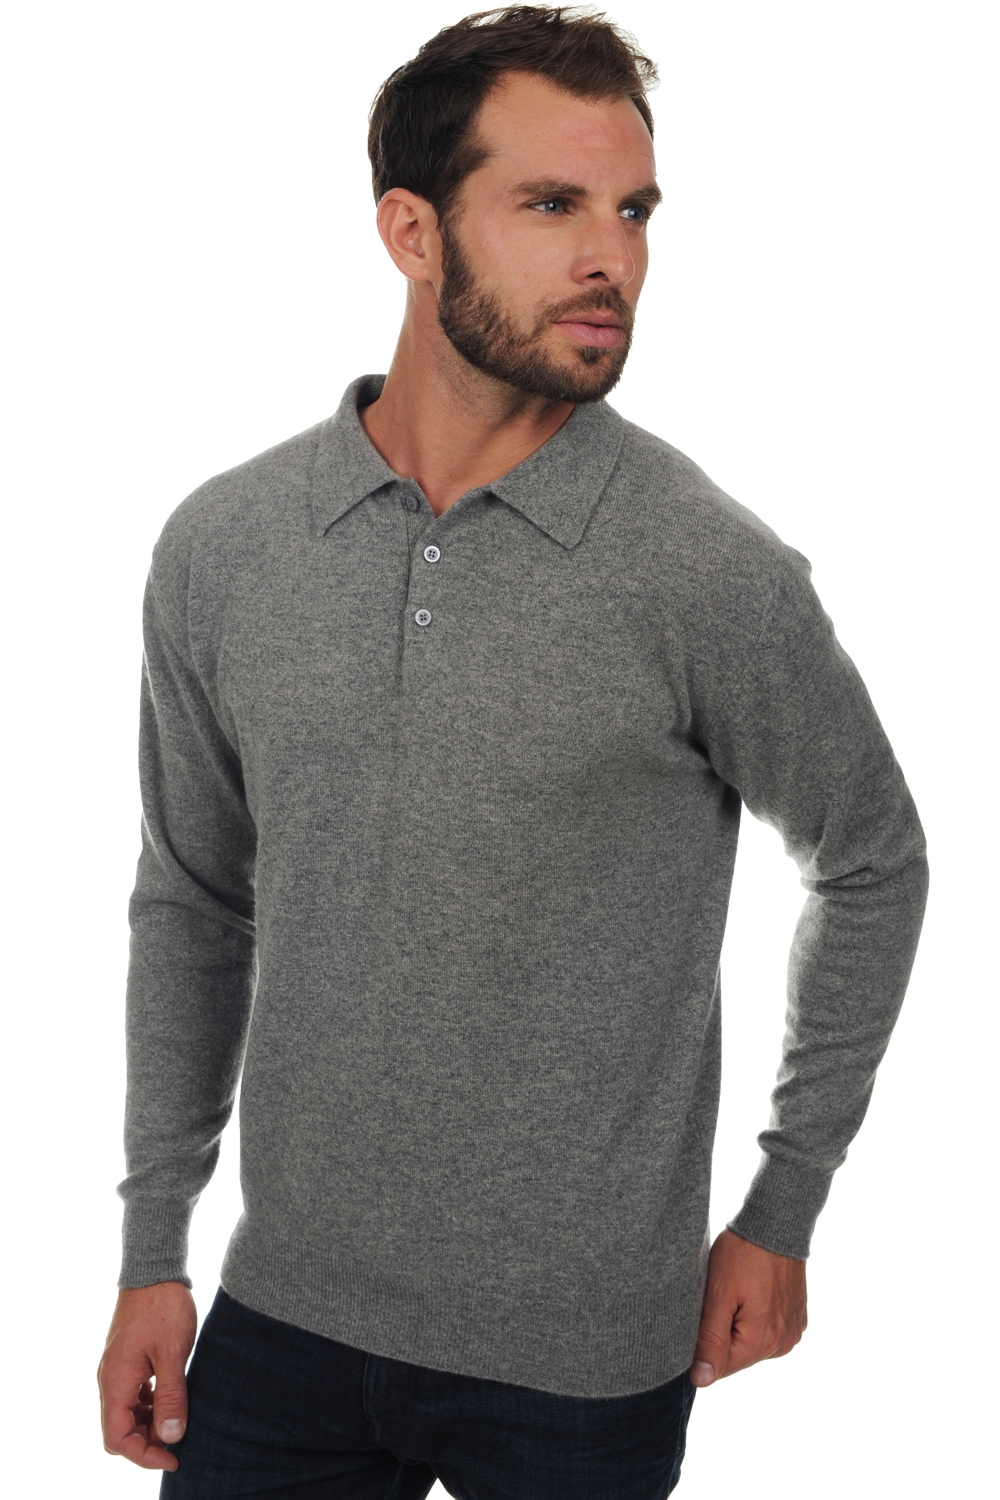 Cashmere men polo style sweaters alexandre grey marl 2xl